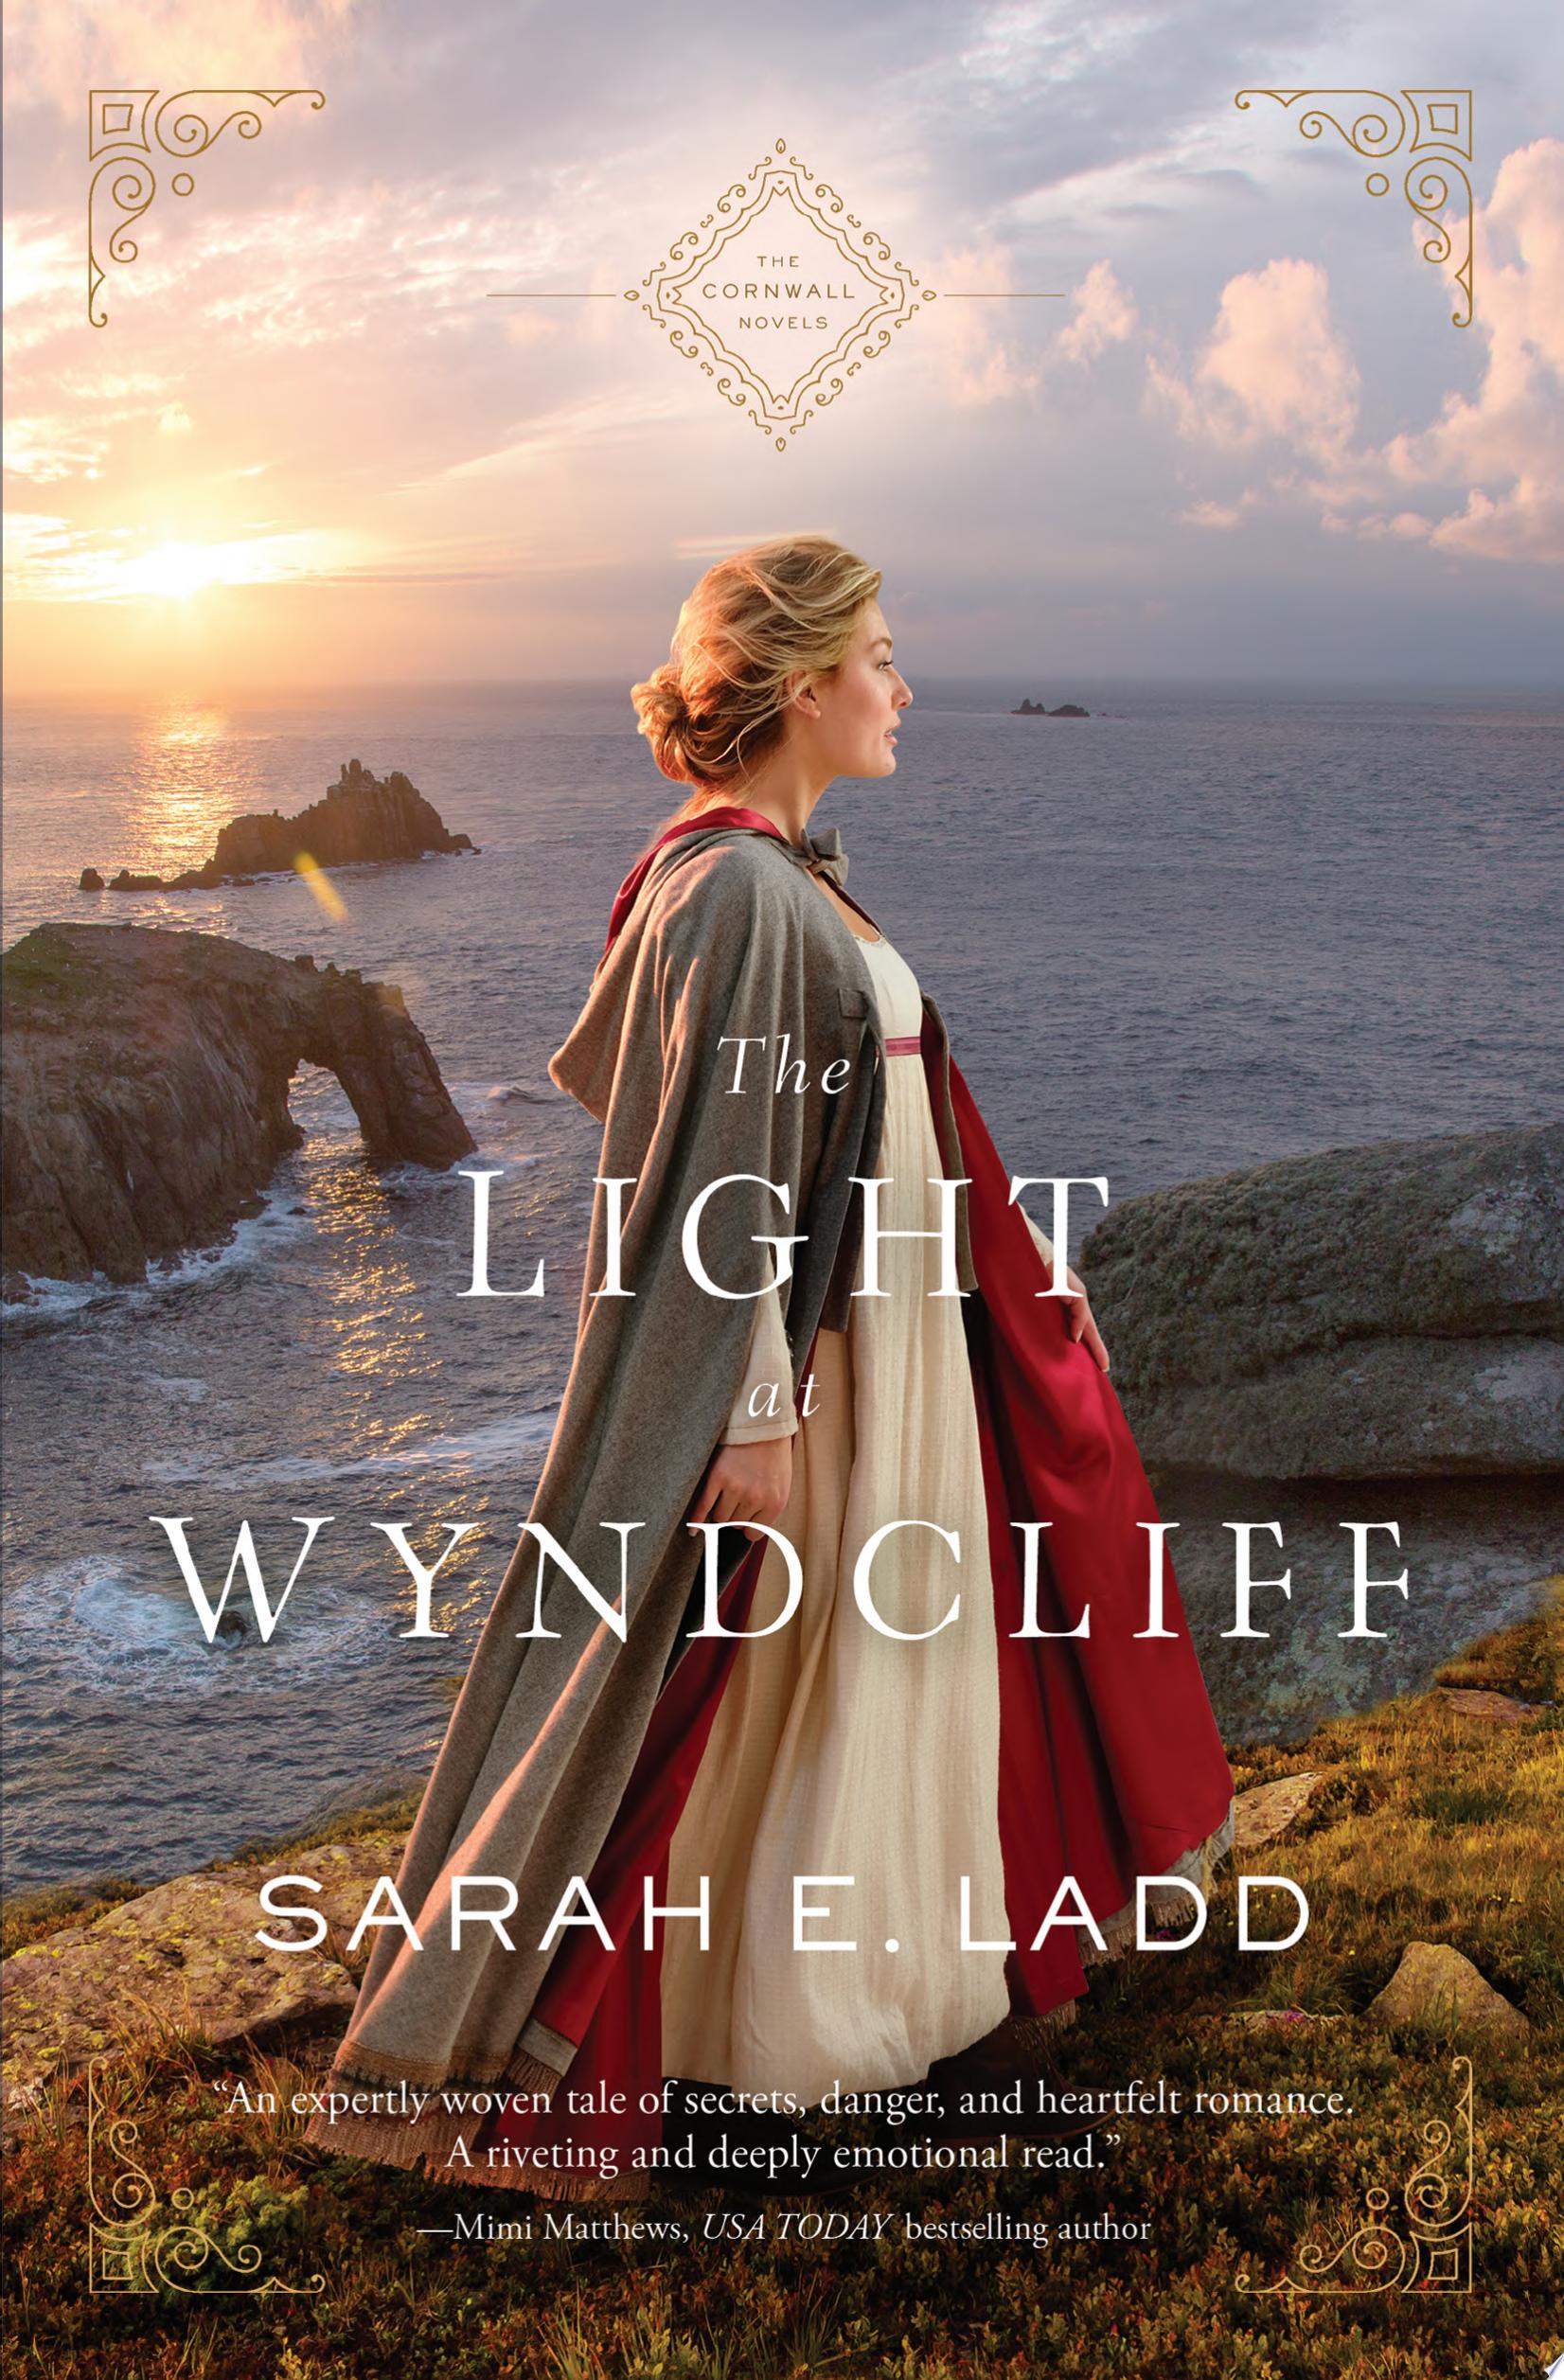 Image for "The Light at Wyndcliff"